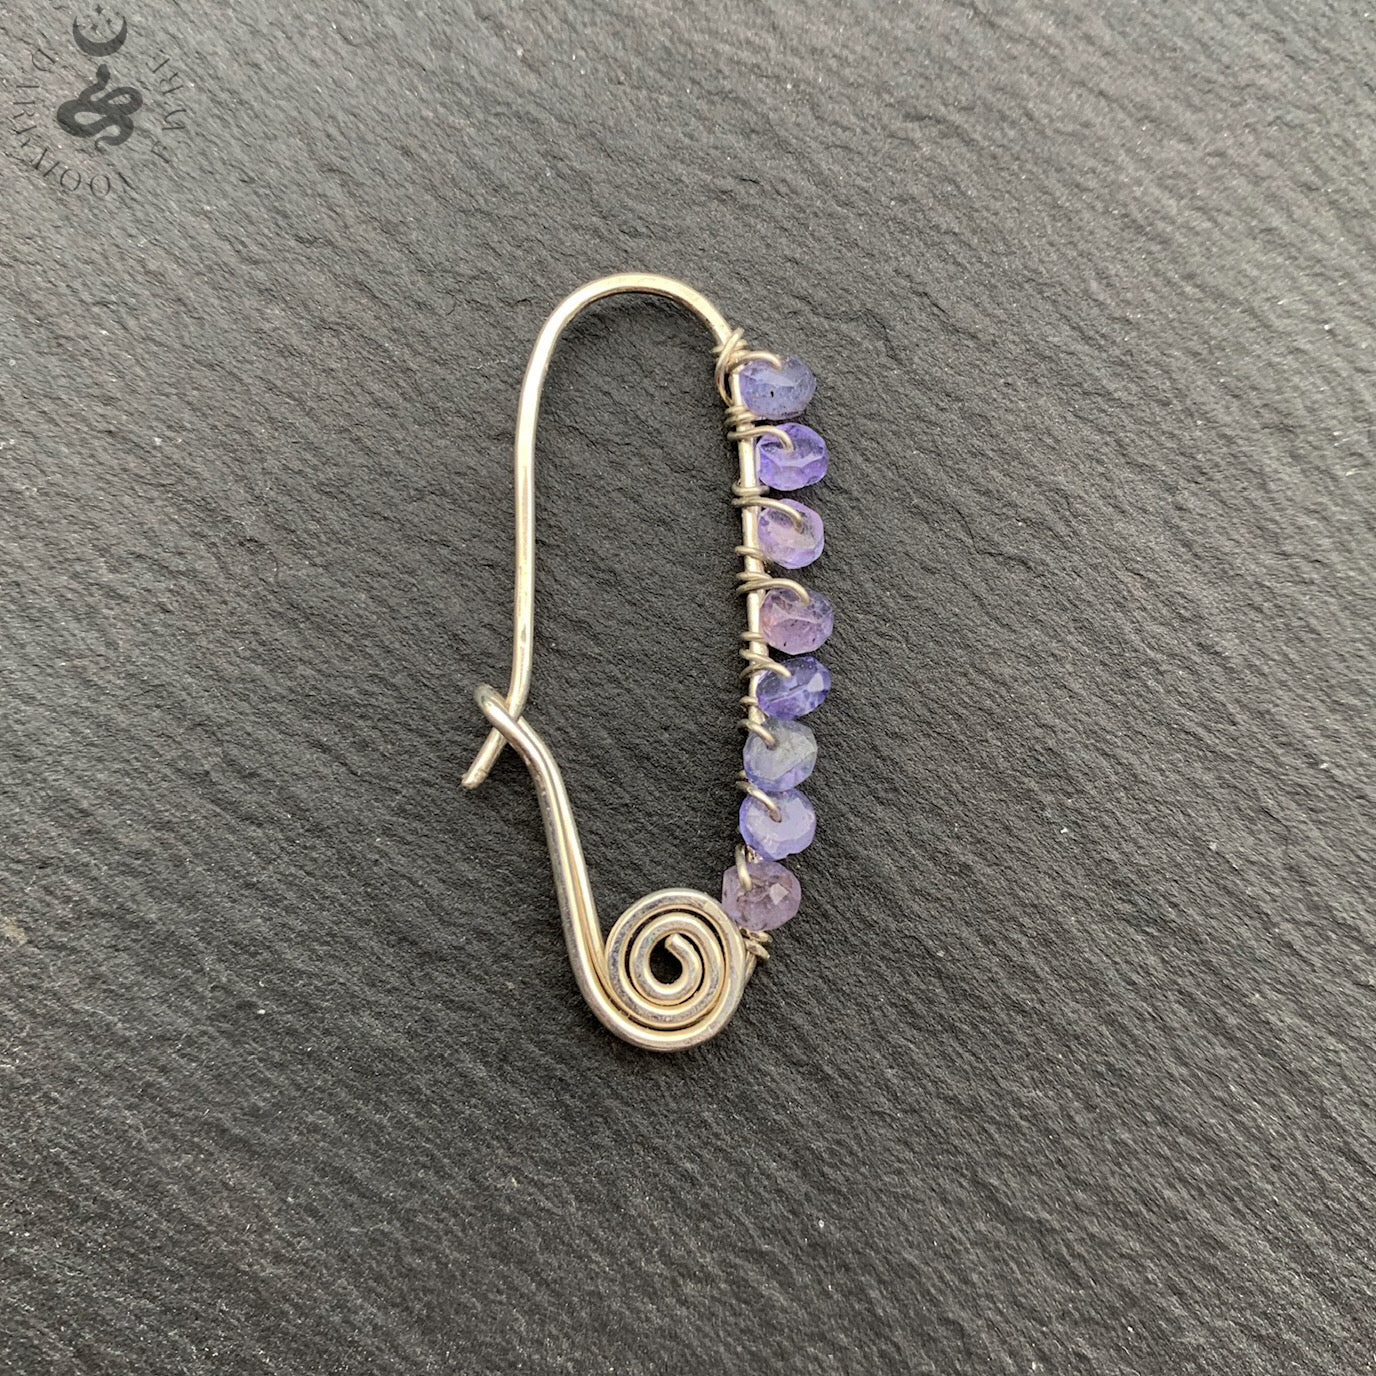 Tanzanite Safety Pin Single Earring In All 925 Sterling Silver Hand Forged Wire - Darkmoon Fayre